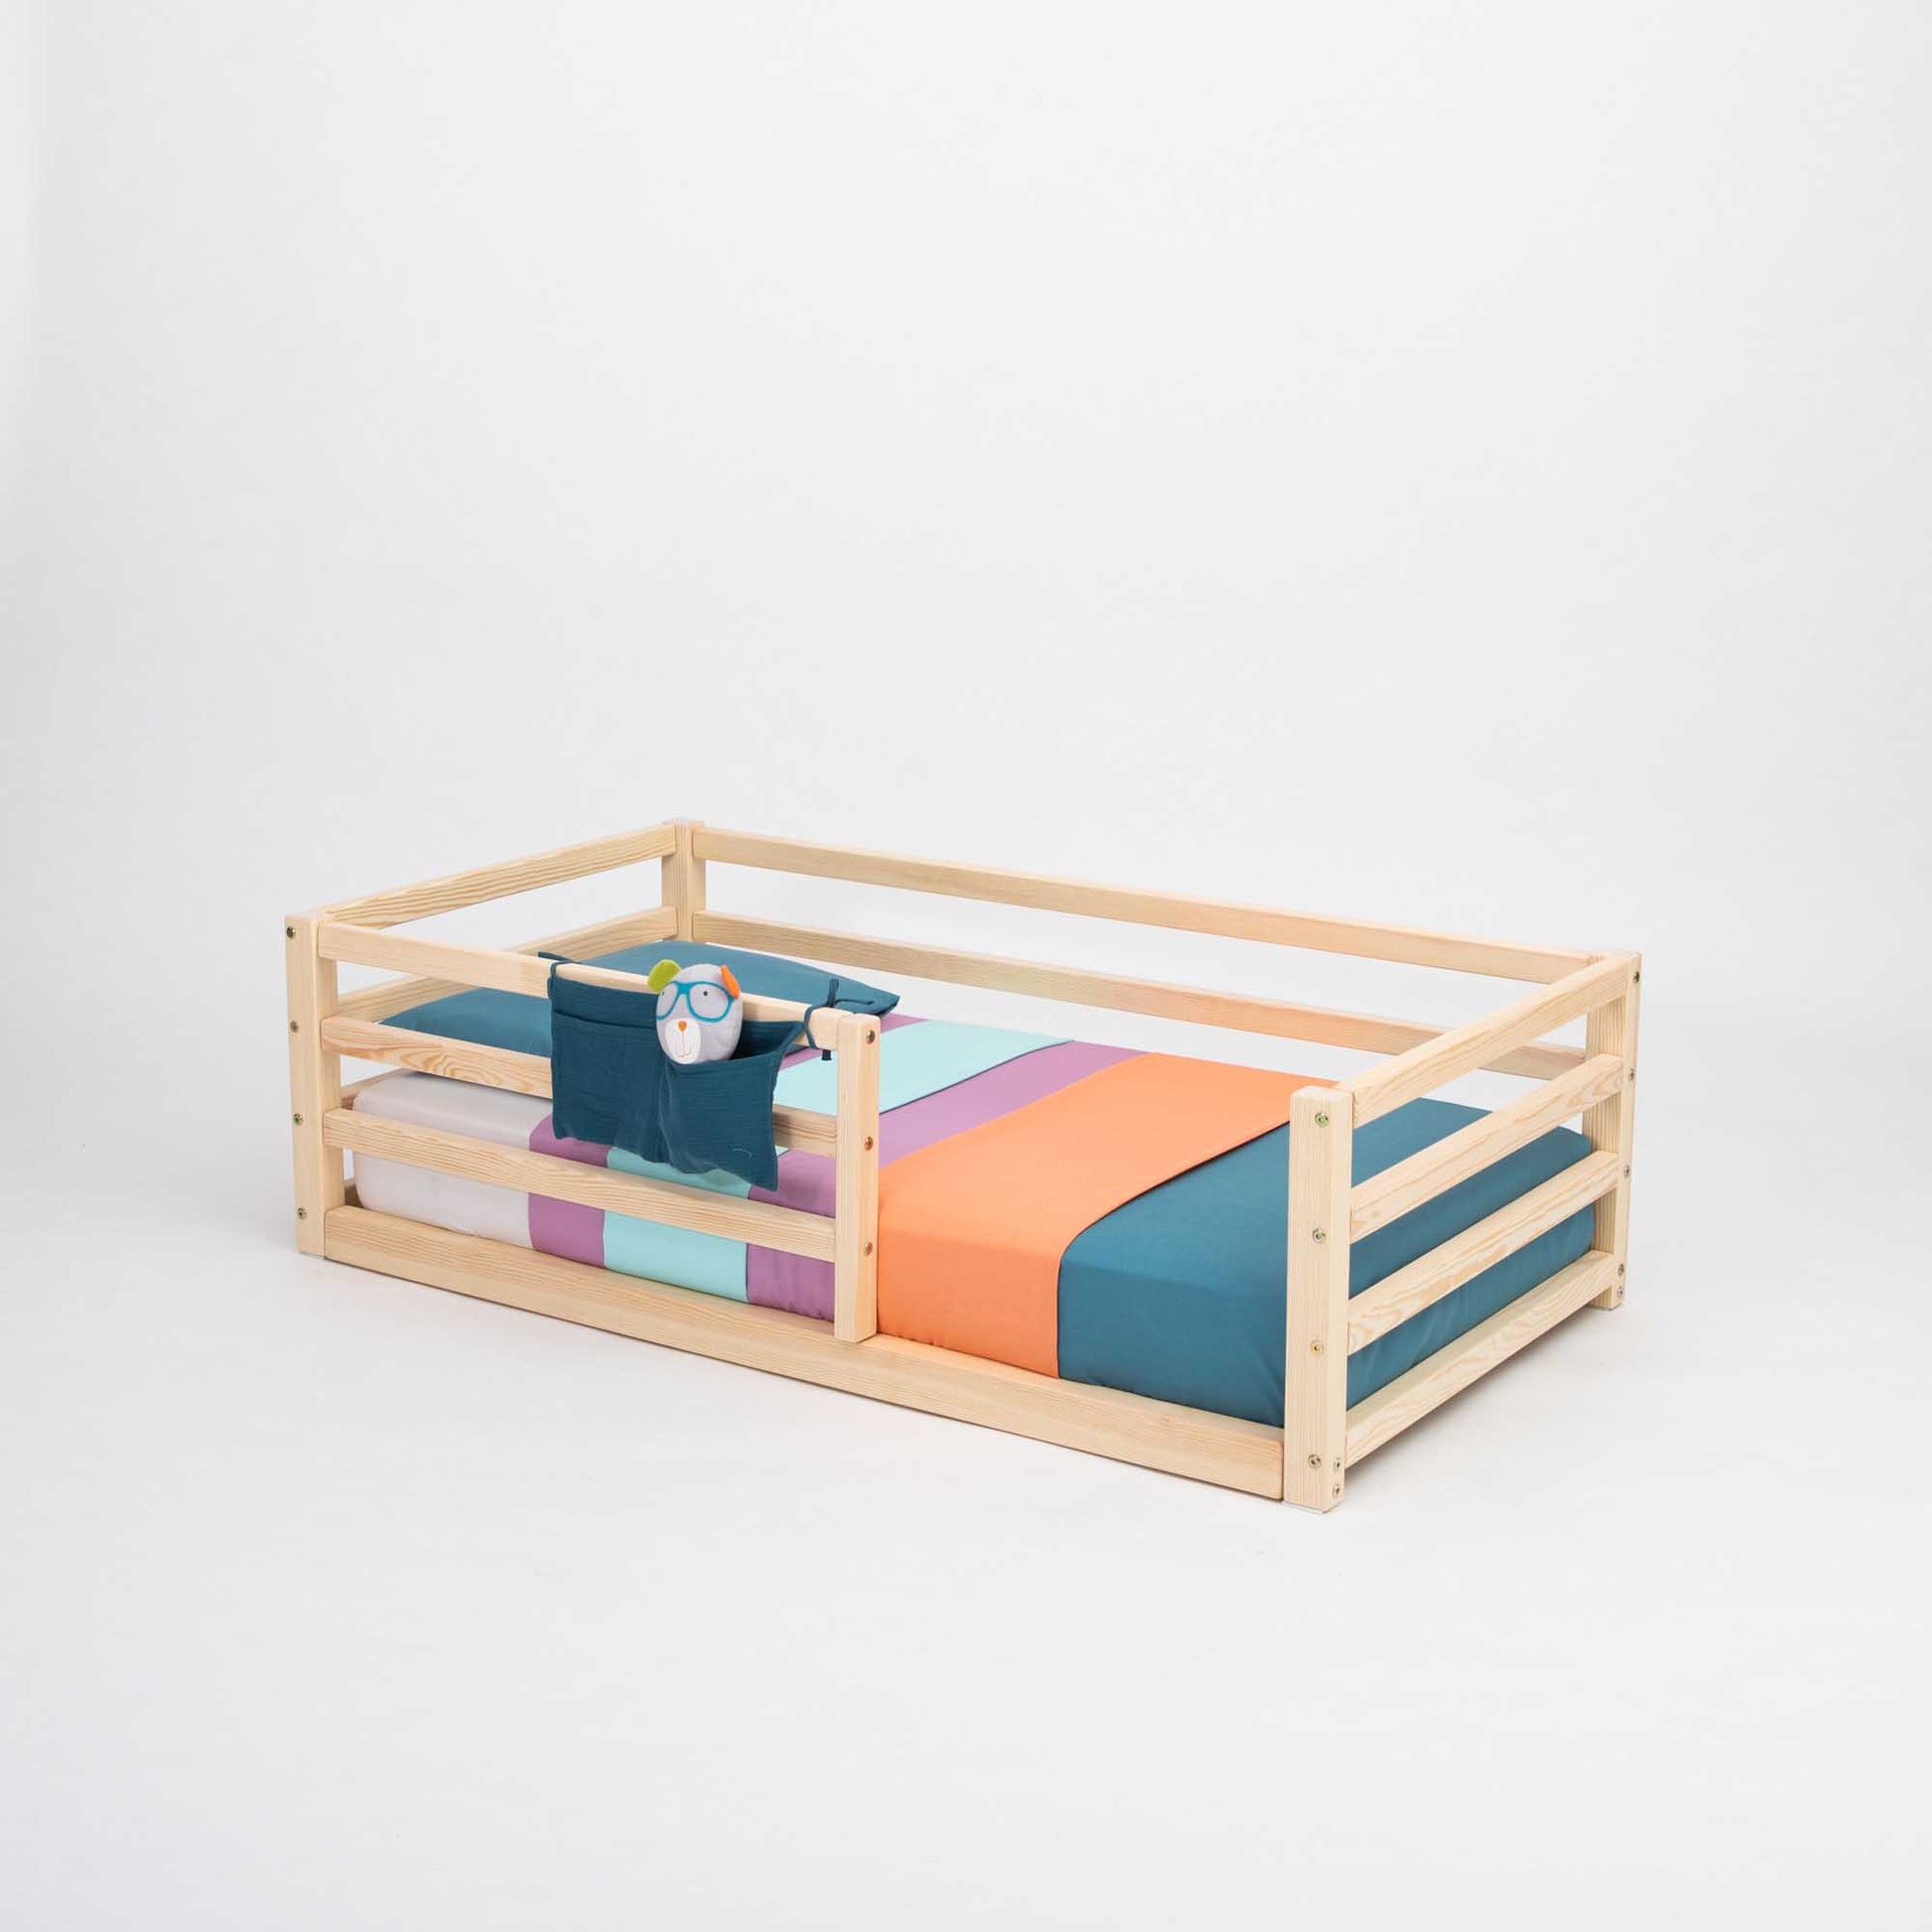 A colorful striped sheet adorns a Sweet Home From Wood floor-level kids' bed with a horizontal rail fence, making it the perfect transitional piece for independent sleeping.